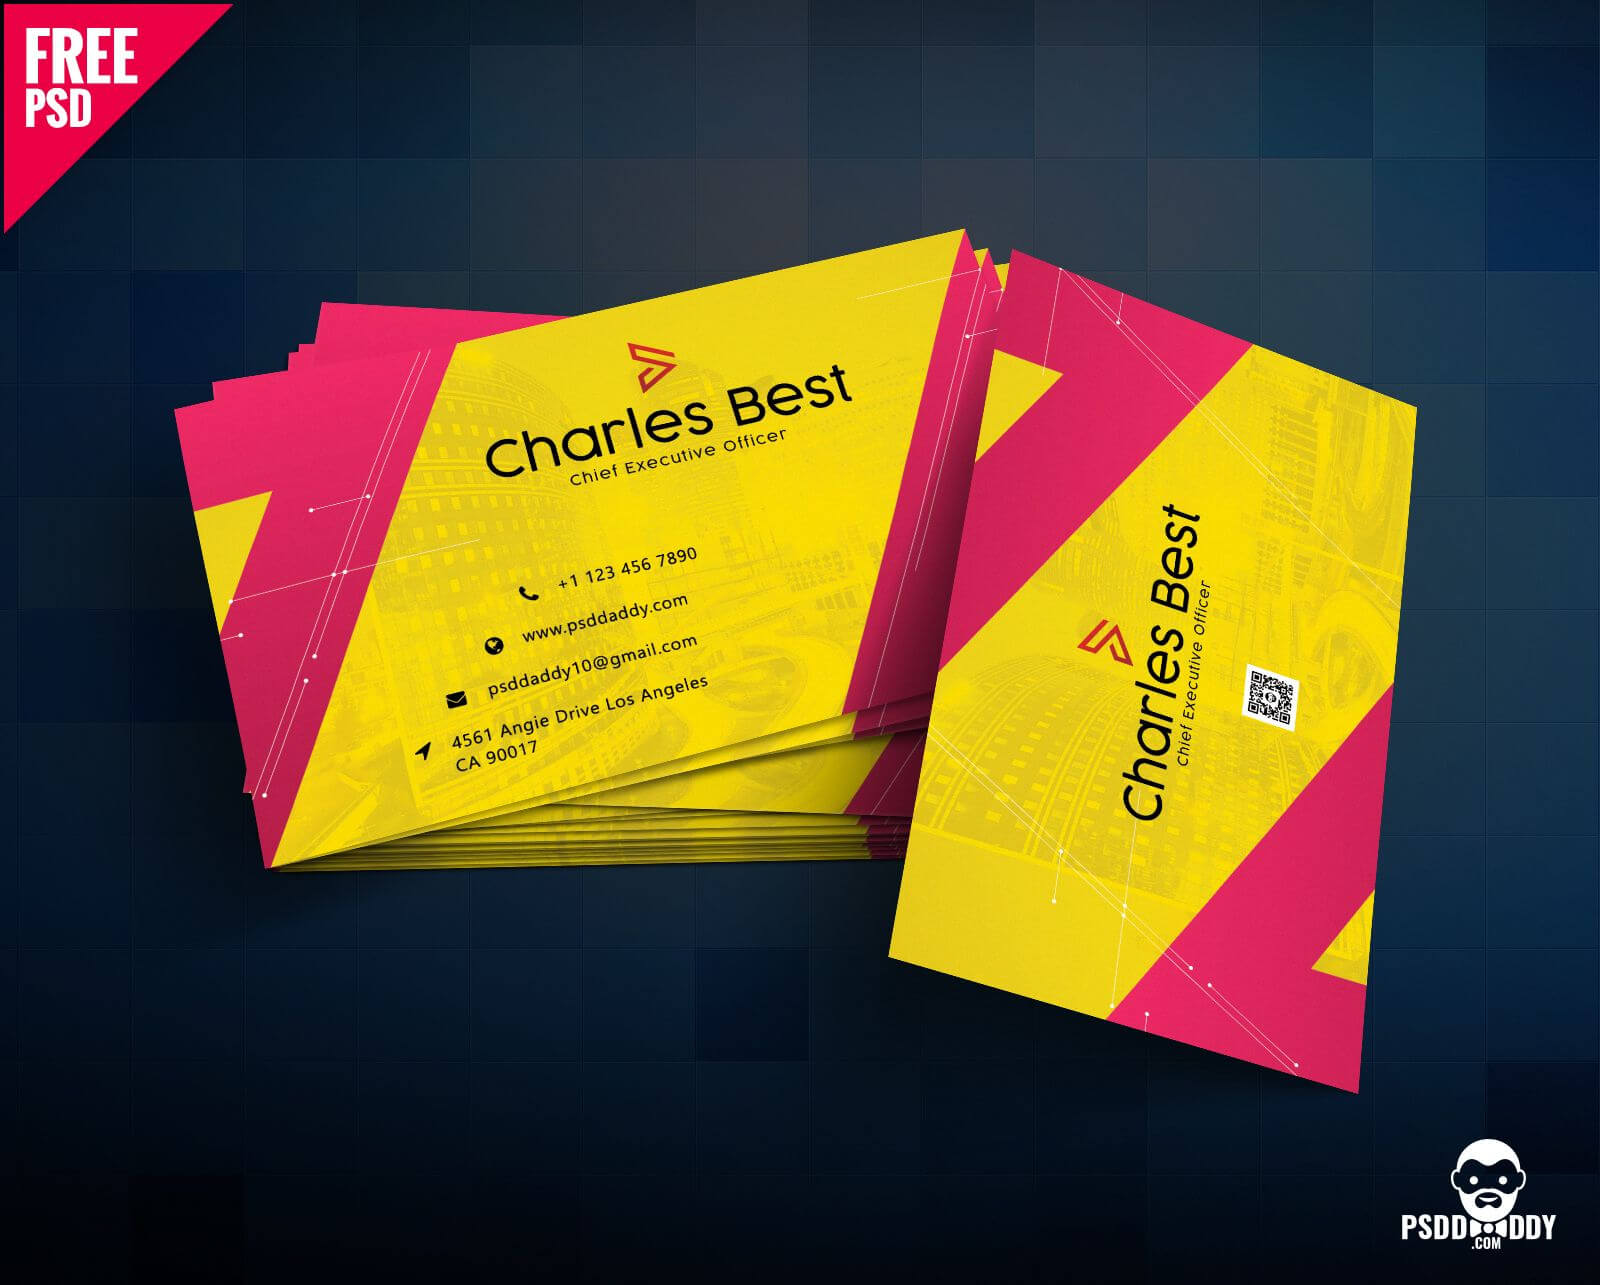 Download] Creative Business Card Free Psd | Psddaddy Regarding Creative Business Card Templates Psd